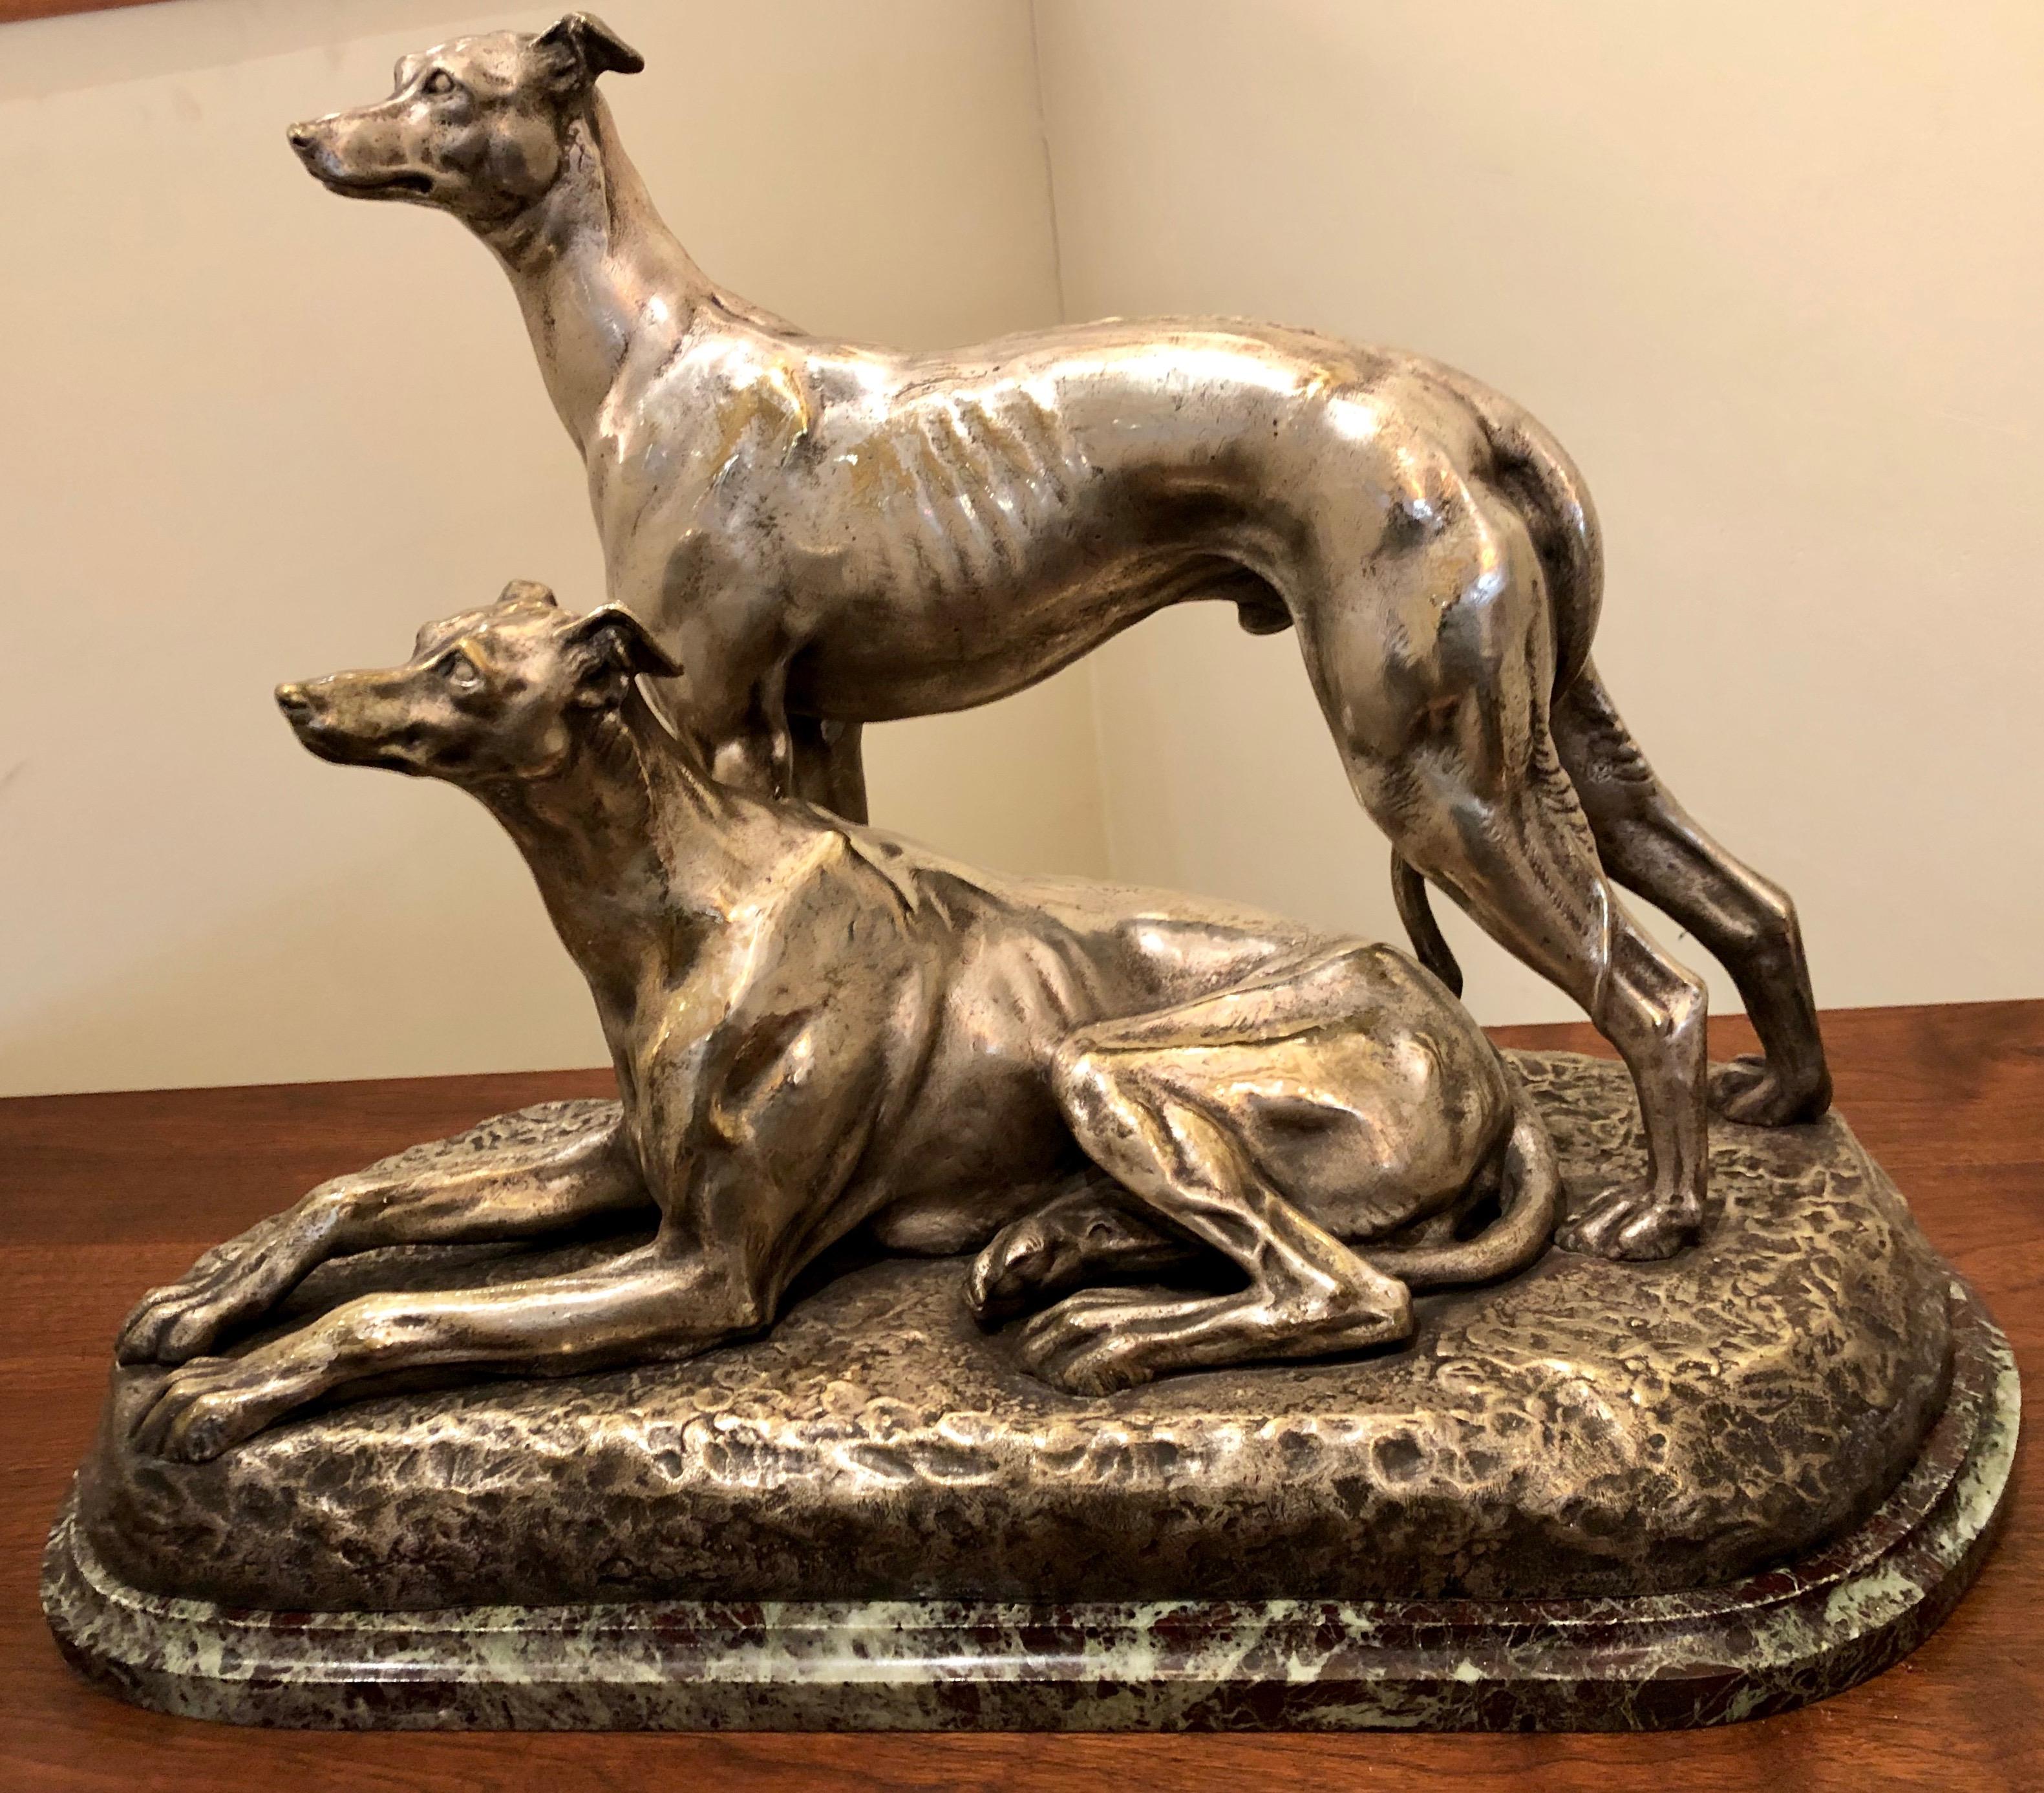 Two greyhound dogs, a nickeled bronze sculpture by French artist Suzanne Bizard. Stylized figural and accurate rendering portraying a pair of greyhound dogs relaxed in situ. Stunning quality showing the many physical characteristics of this breed: